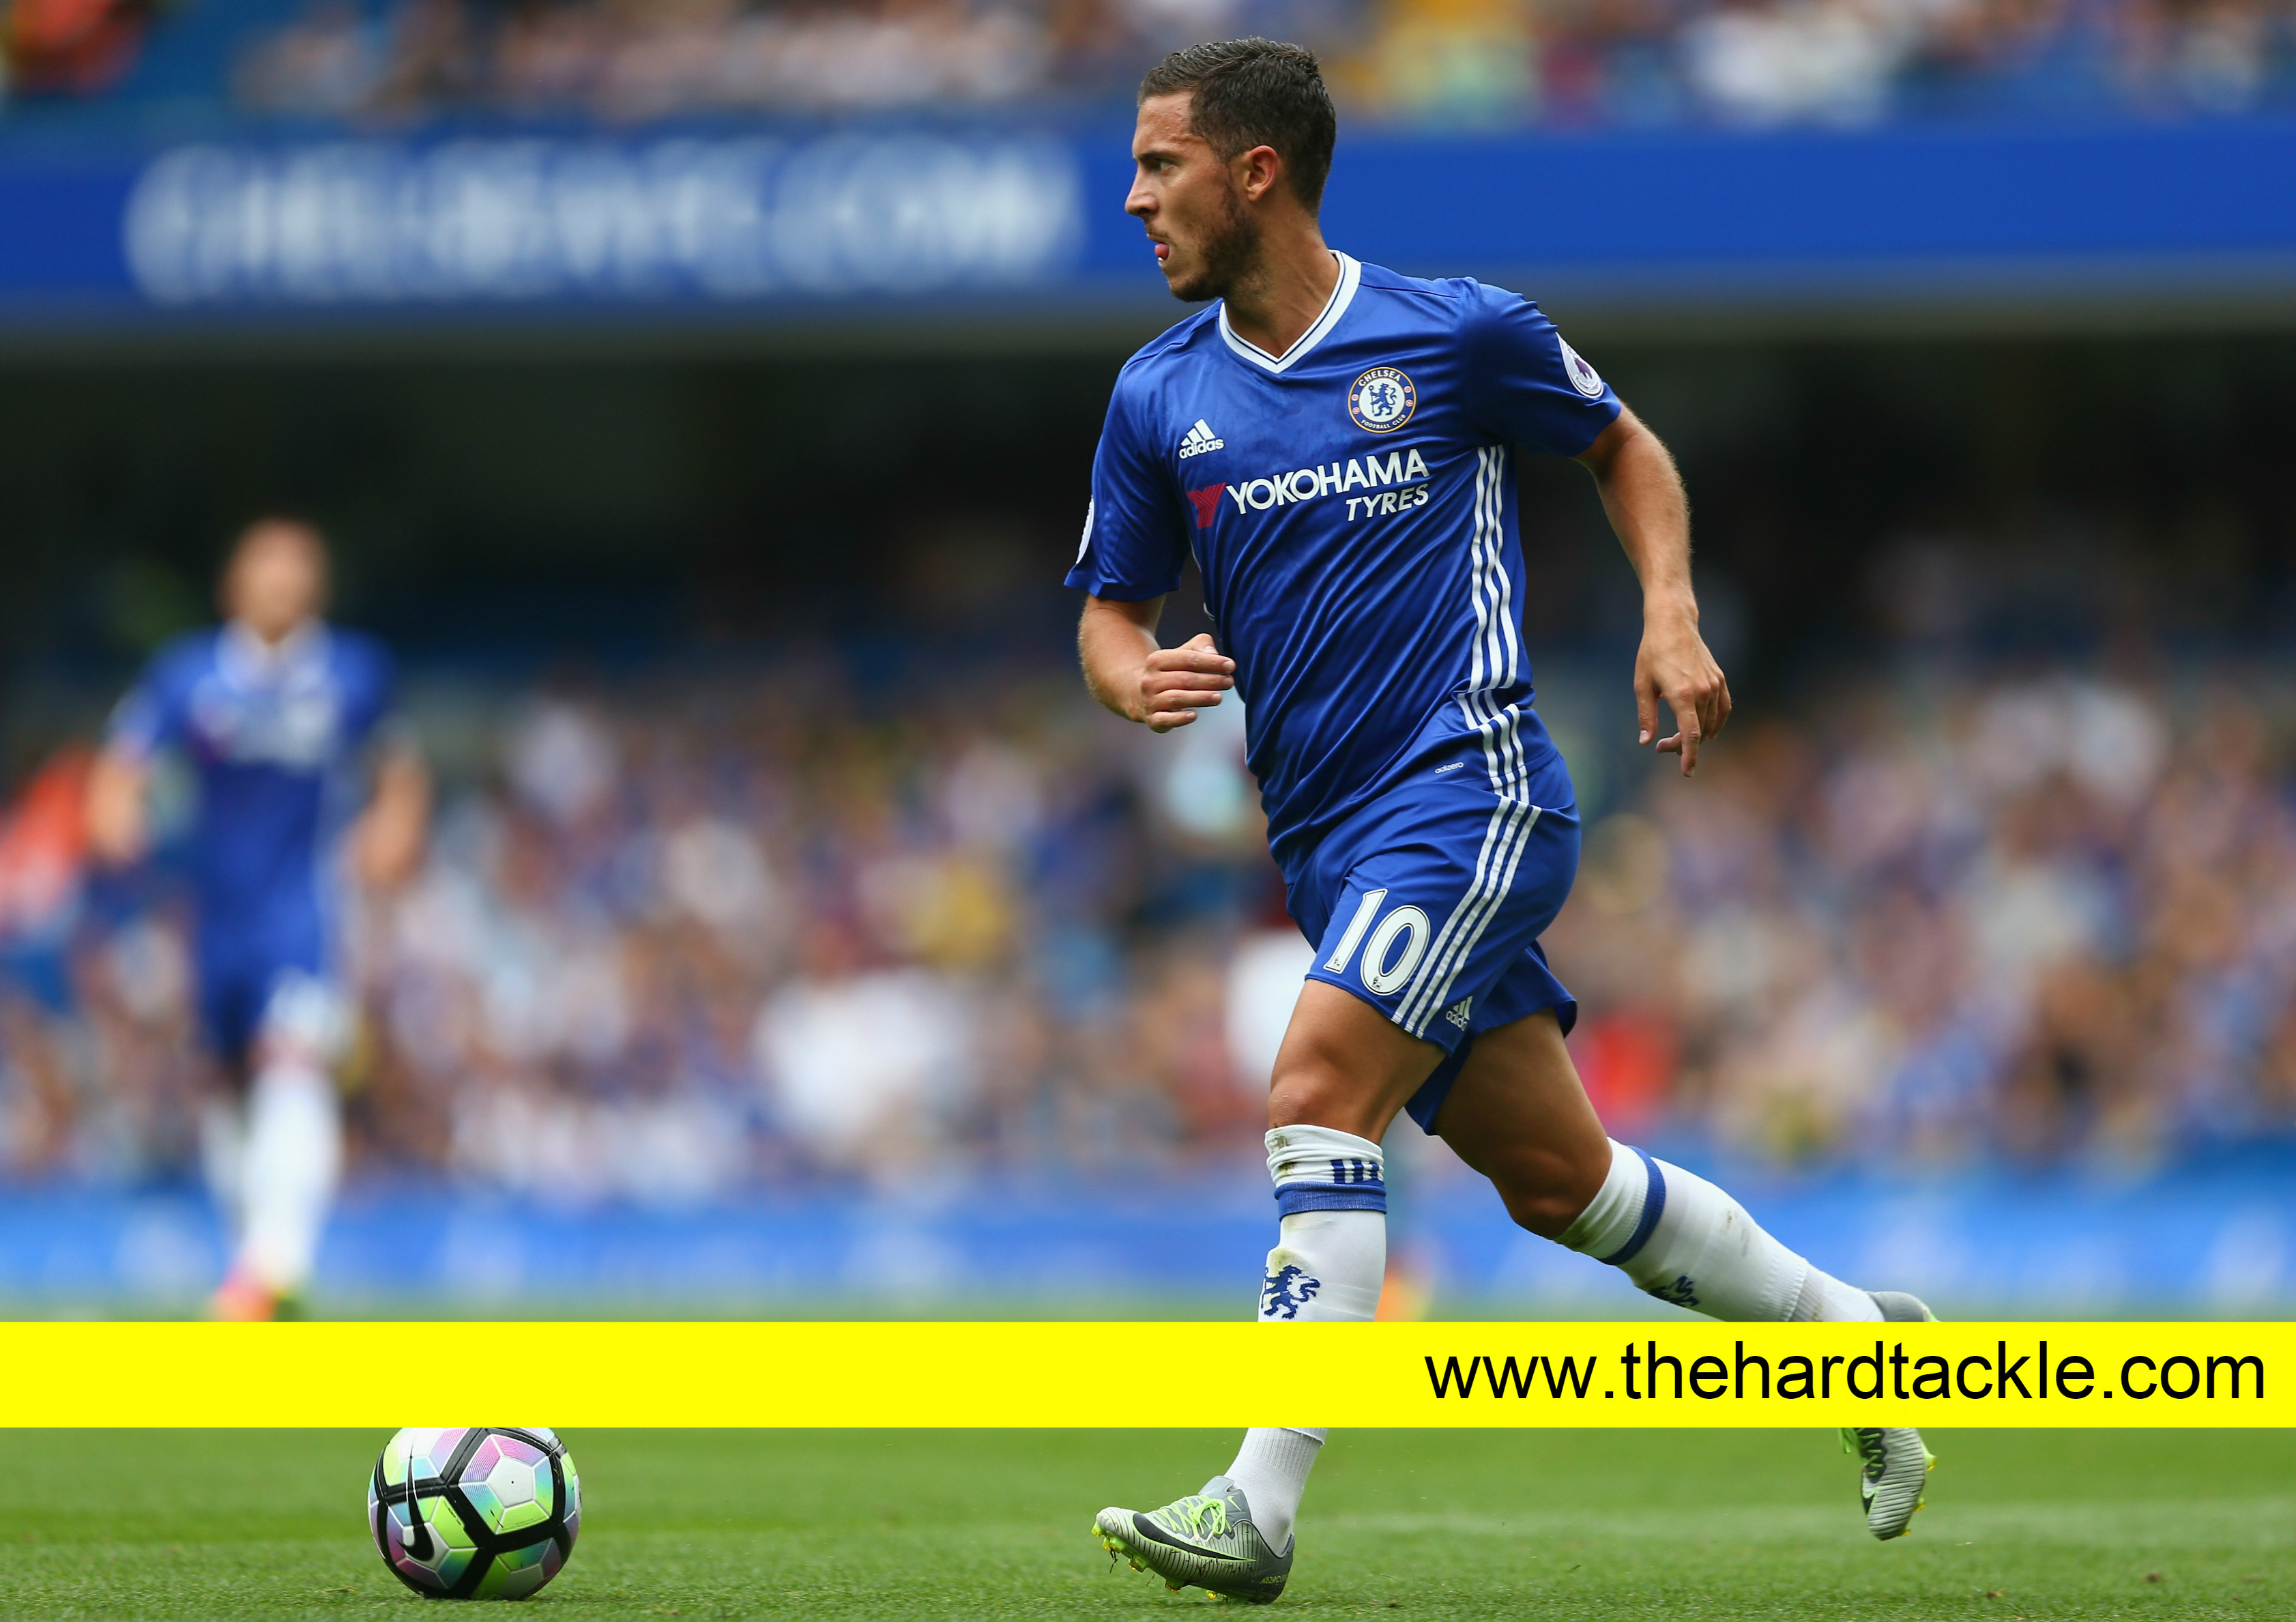 LONDON, ENGLAND - AUGUST 27: Eden Hazard of Chelsea in action during the Premier League match between Chelsea and Burnley at Stamford Bridge on August 27, 2016 in London, England. (Photo by Steve Bardens/Getty Images)